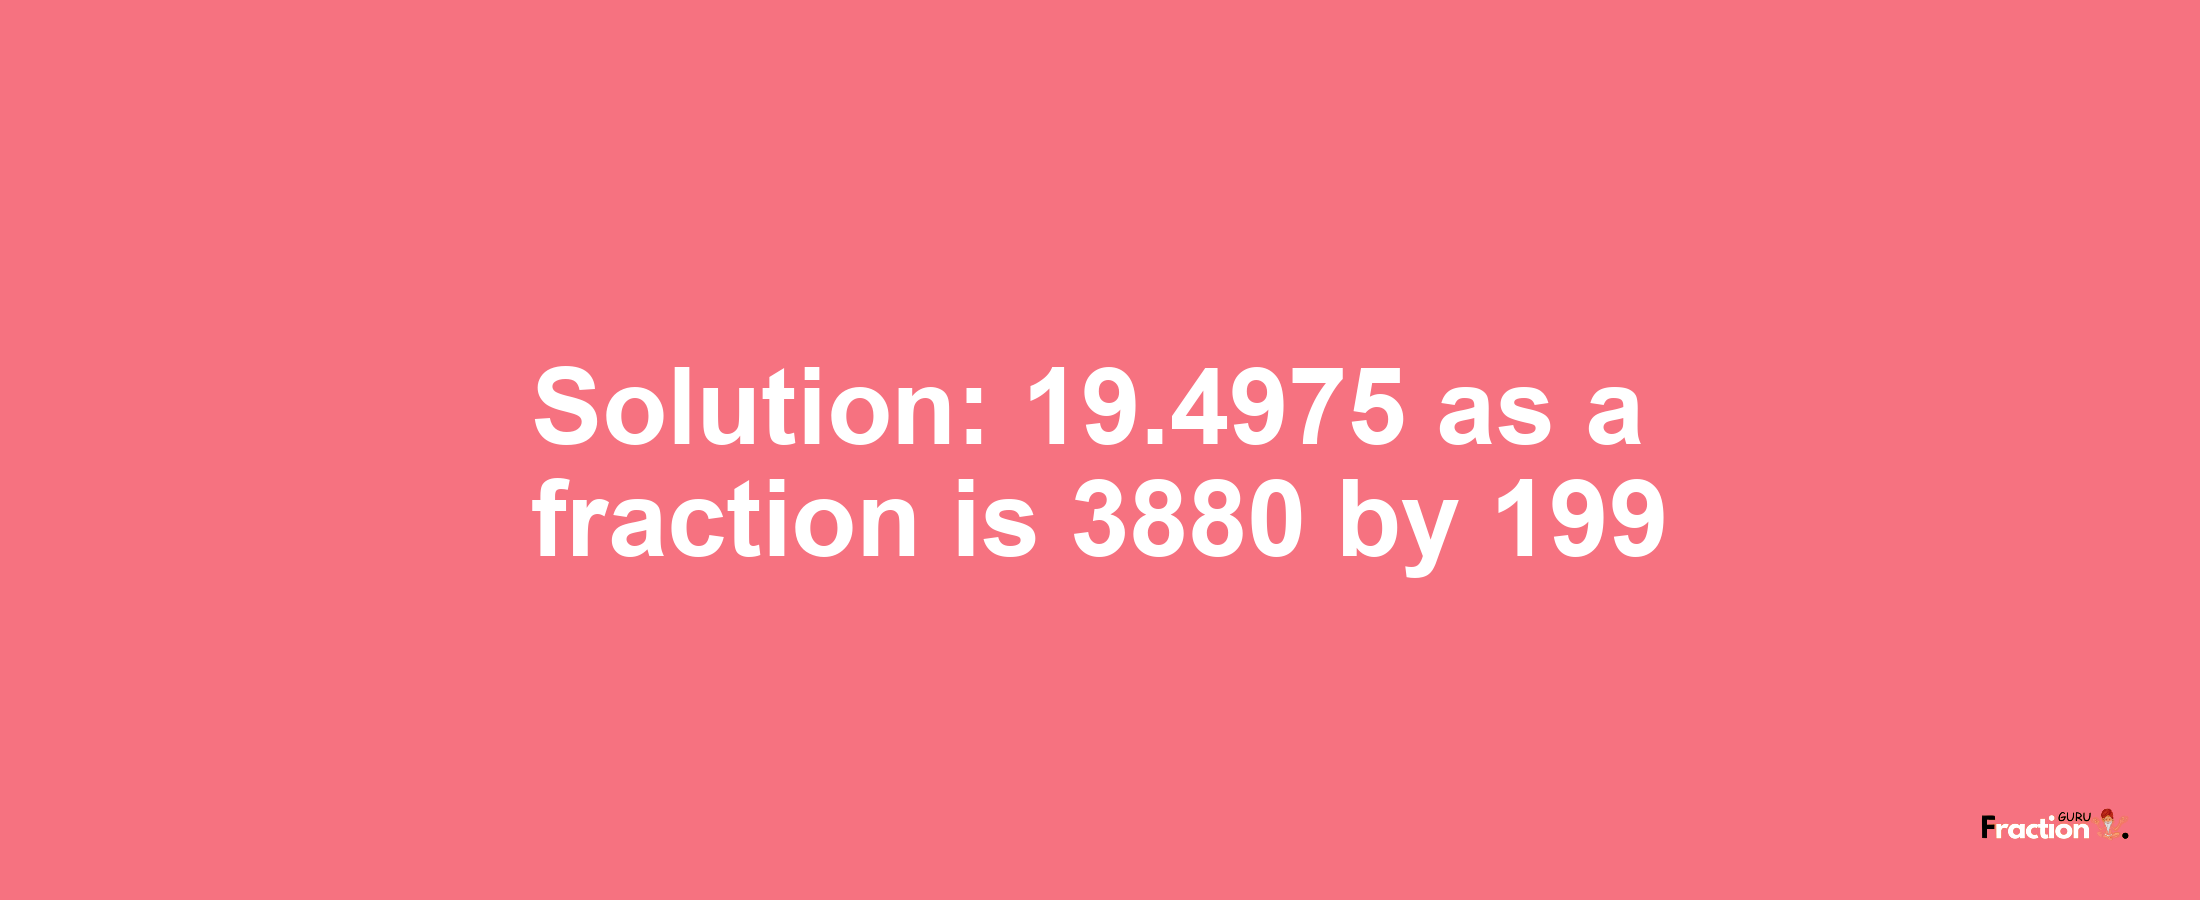 Solution:19.4975 as a fraction is 3880/199